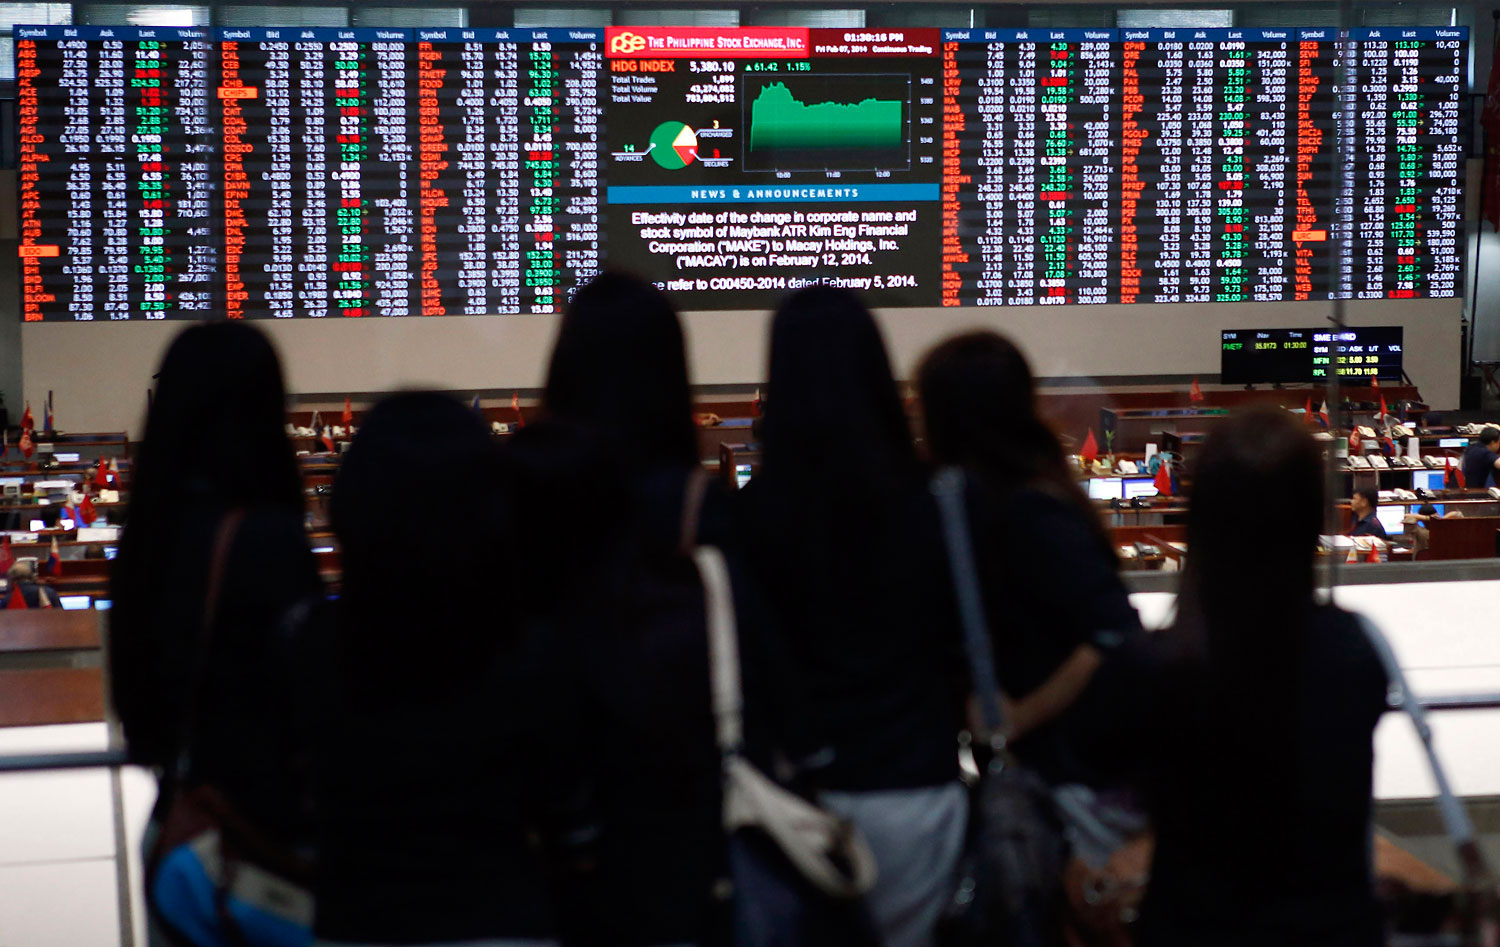 University student interns monitor trading at the Philippine Stock Exchange in Manila's Makati financial district